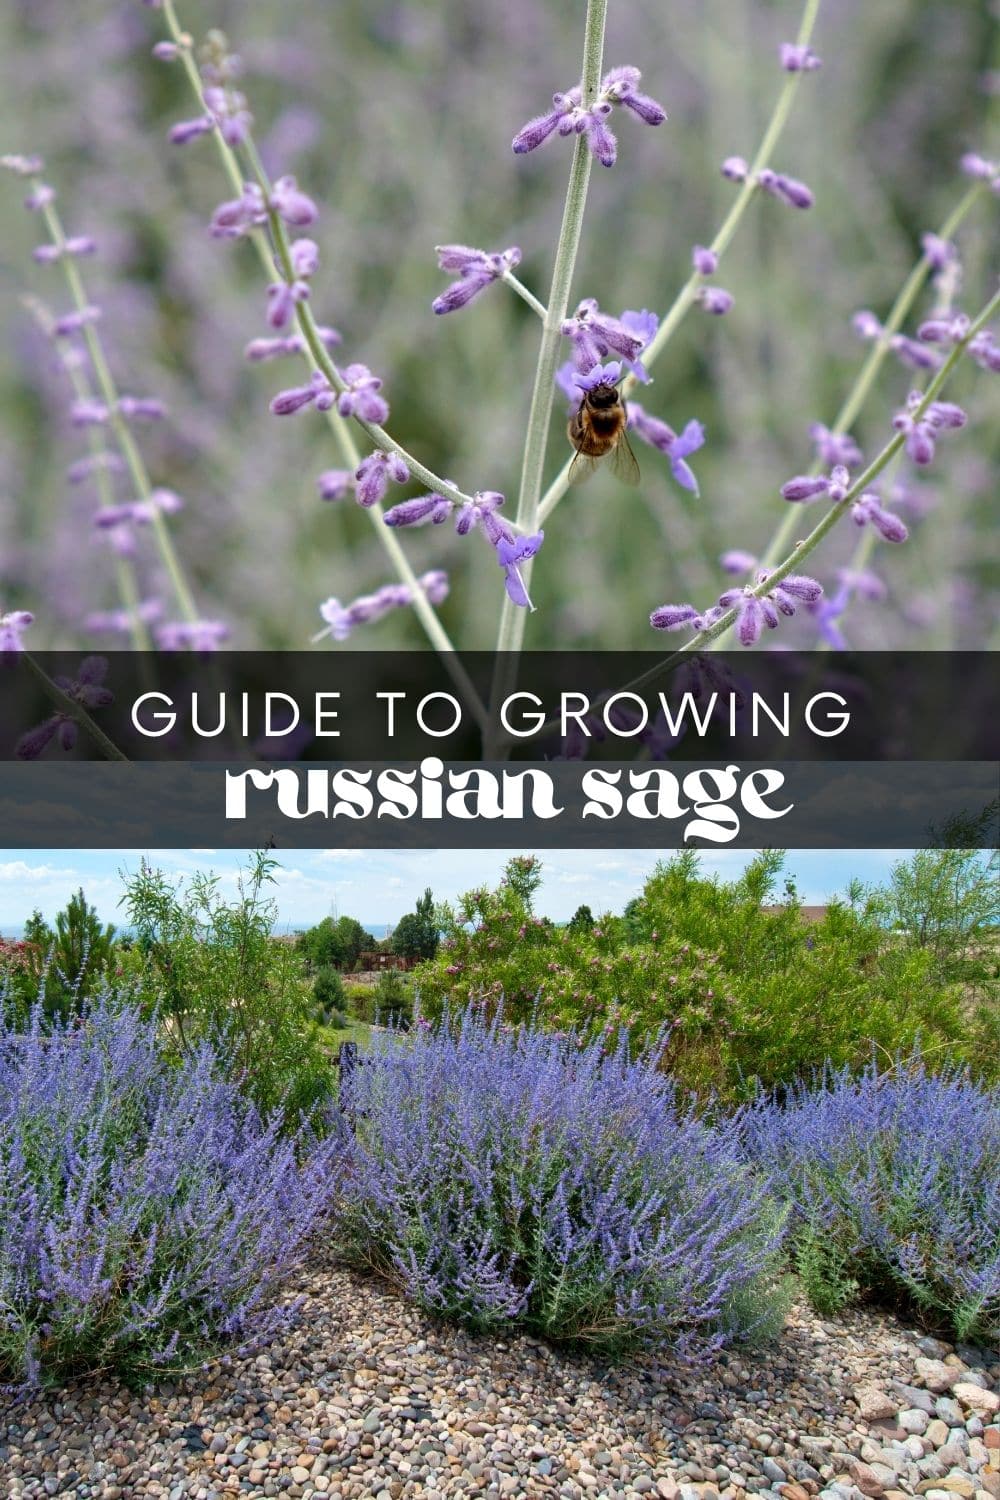 Who doesn't love a plant you can grow with little to no effort? Russian sage is a good choice for beginners or anyone who wants a hands-off approach to gardening. Just give it the right conditions, and it'll do the rest for you! 